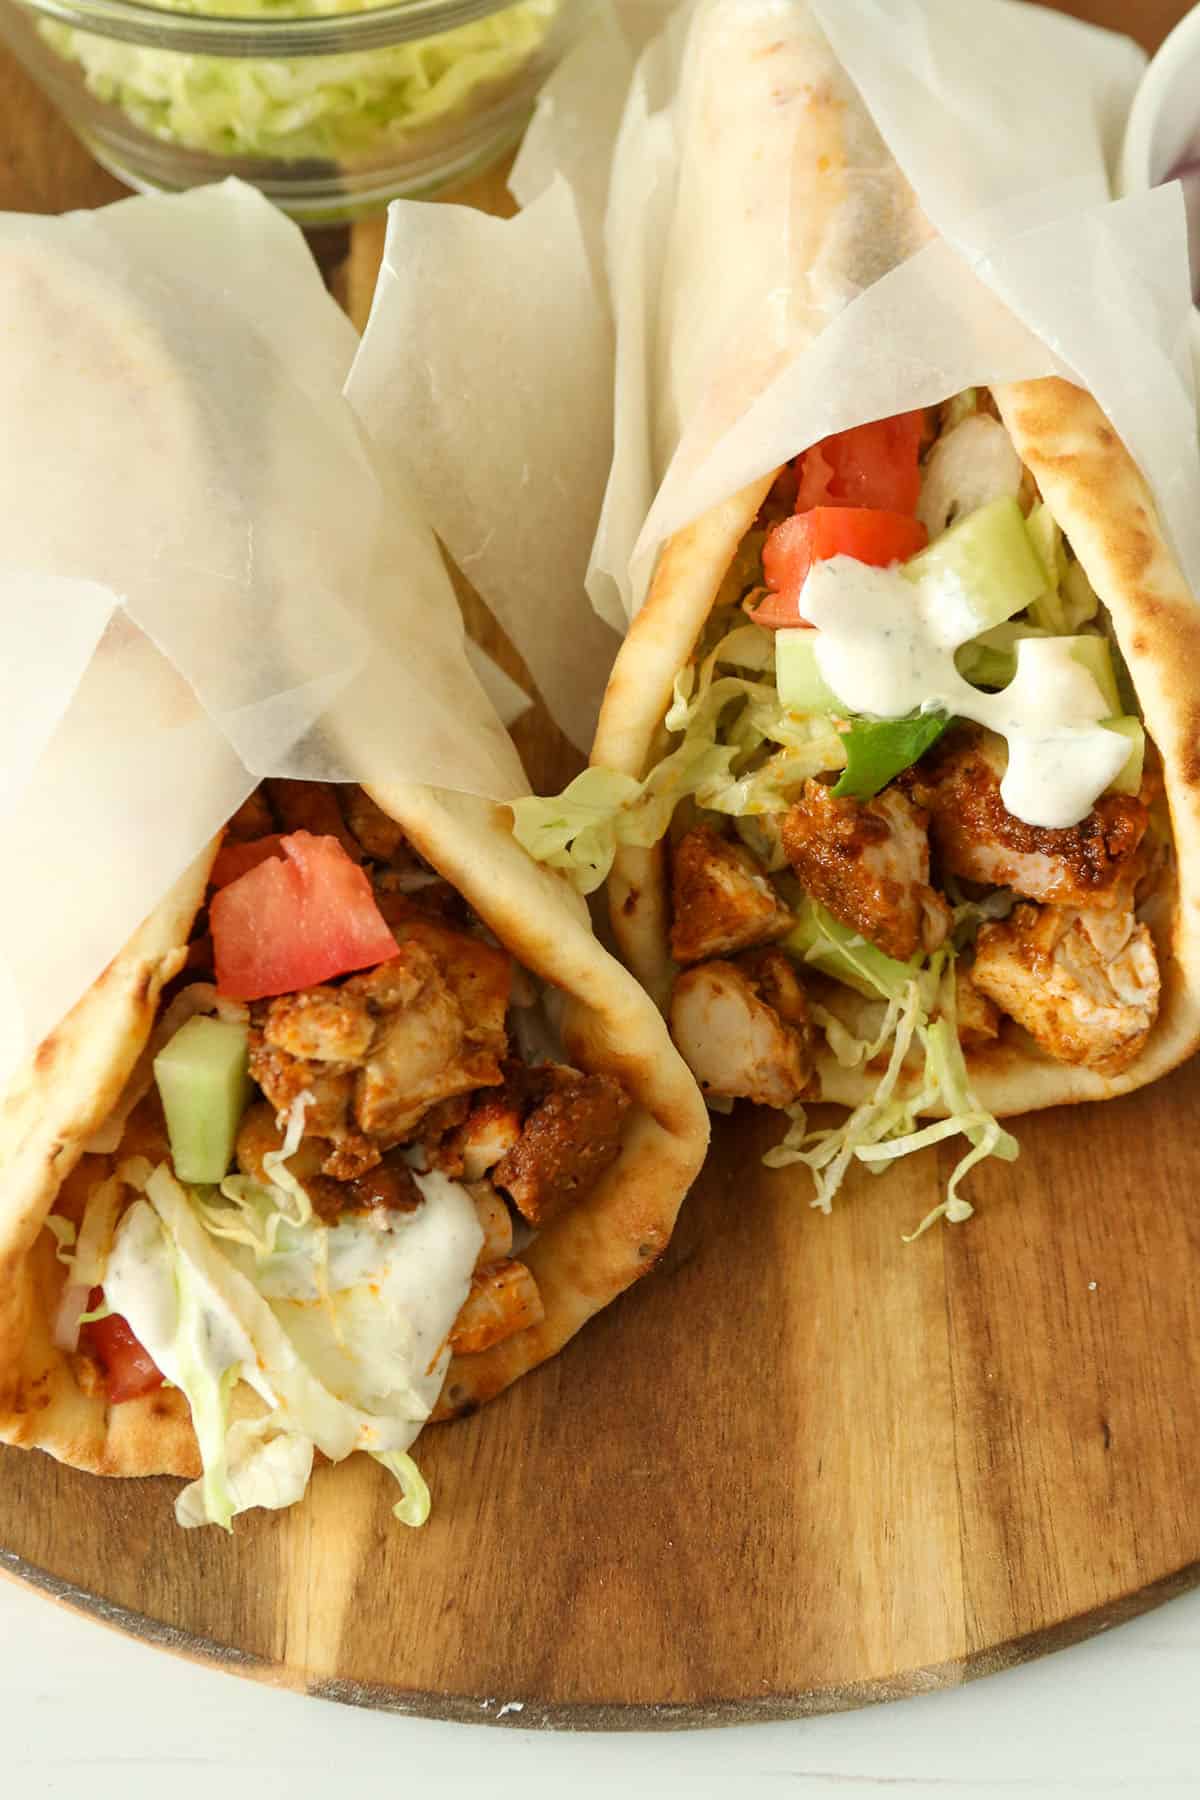 Two wrapped baked shawarma.